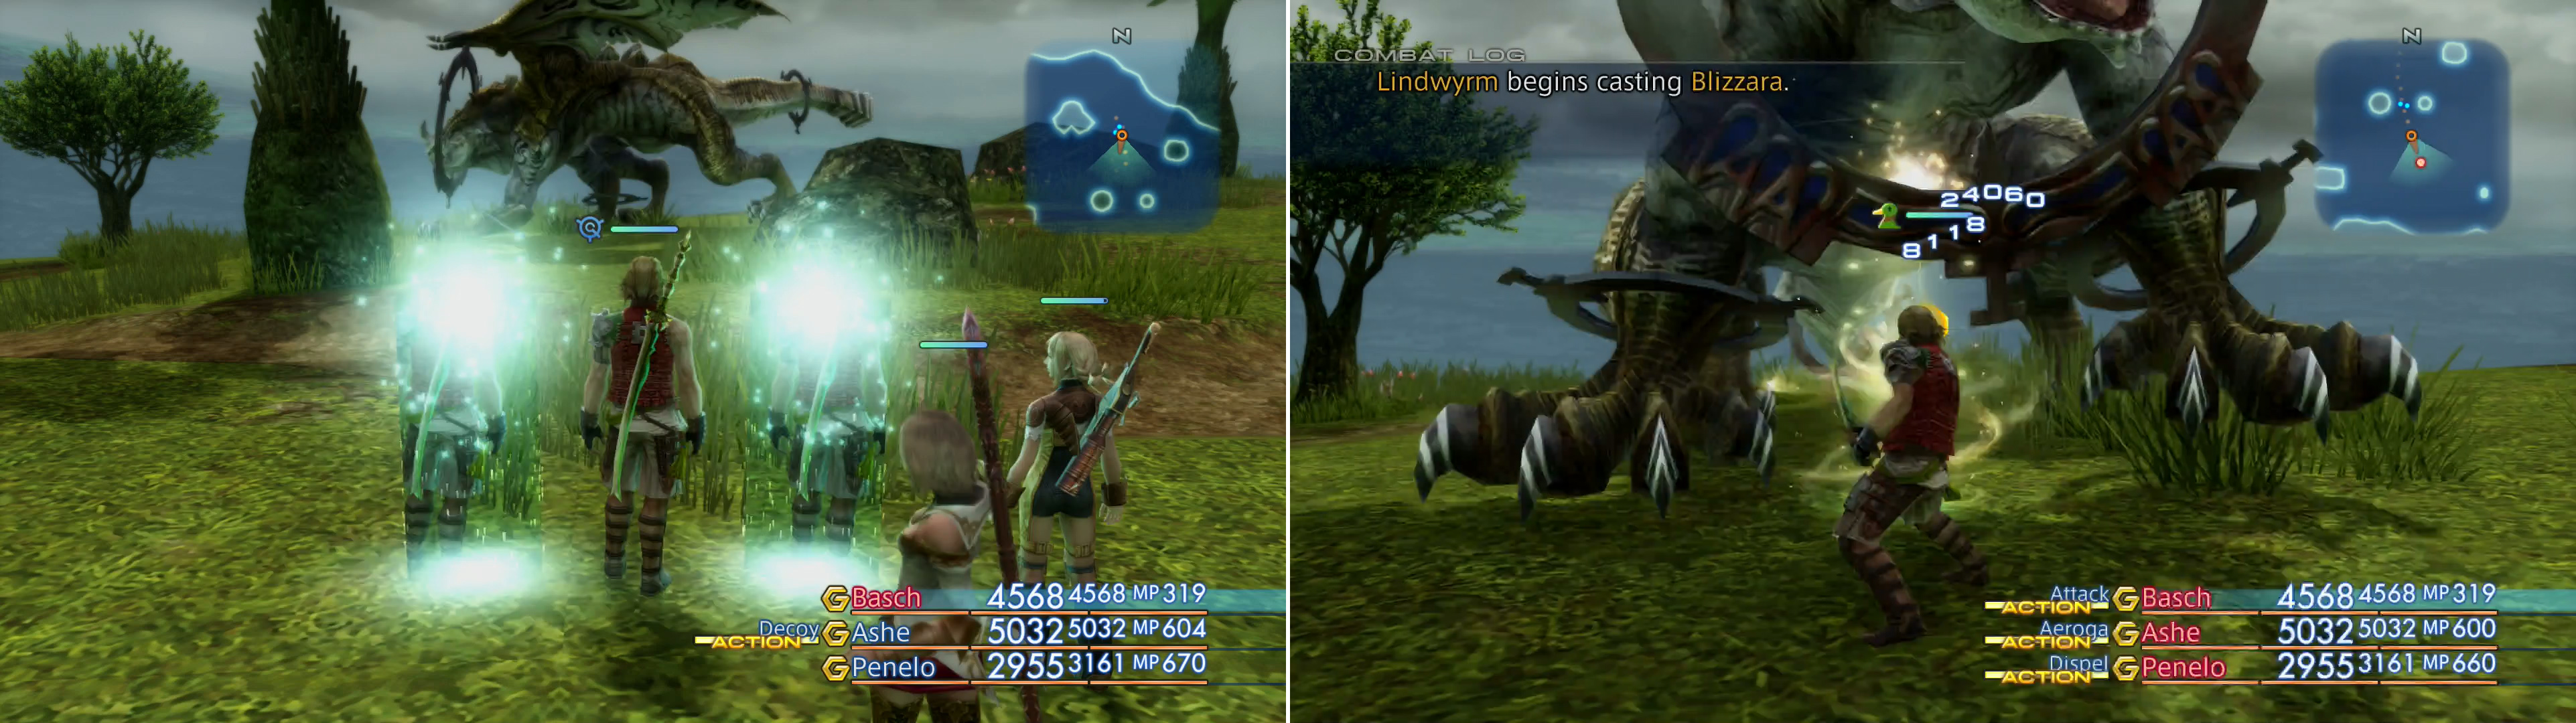 Cast Decoy on your tank (left) then engage Lindwyrm to draw its attention (right).